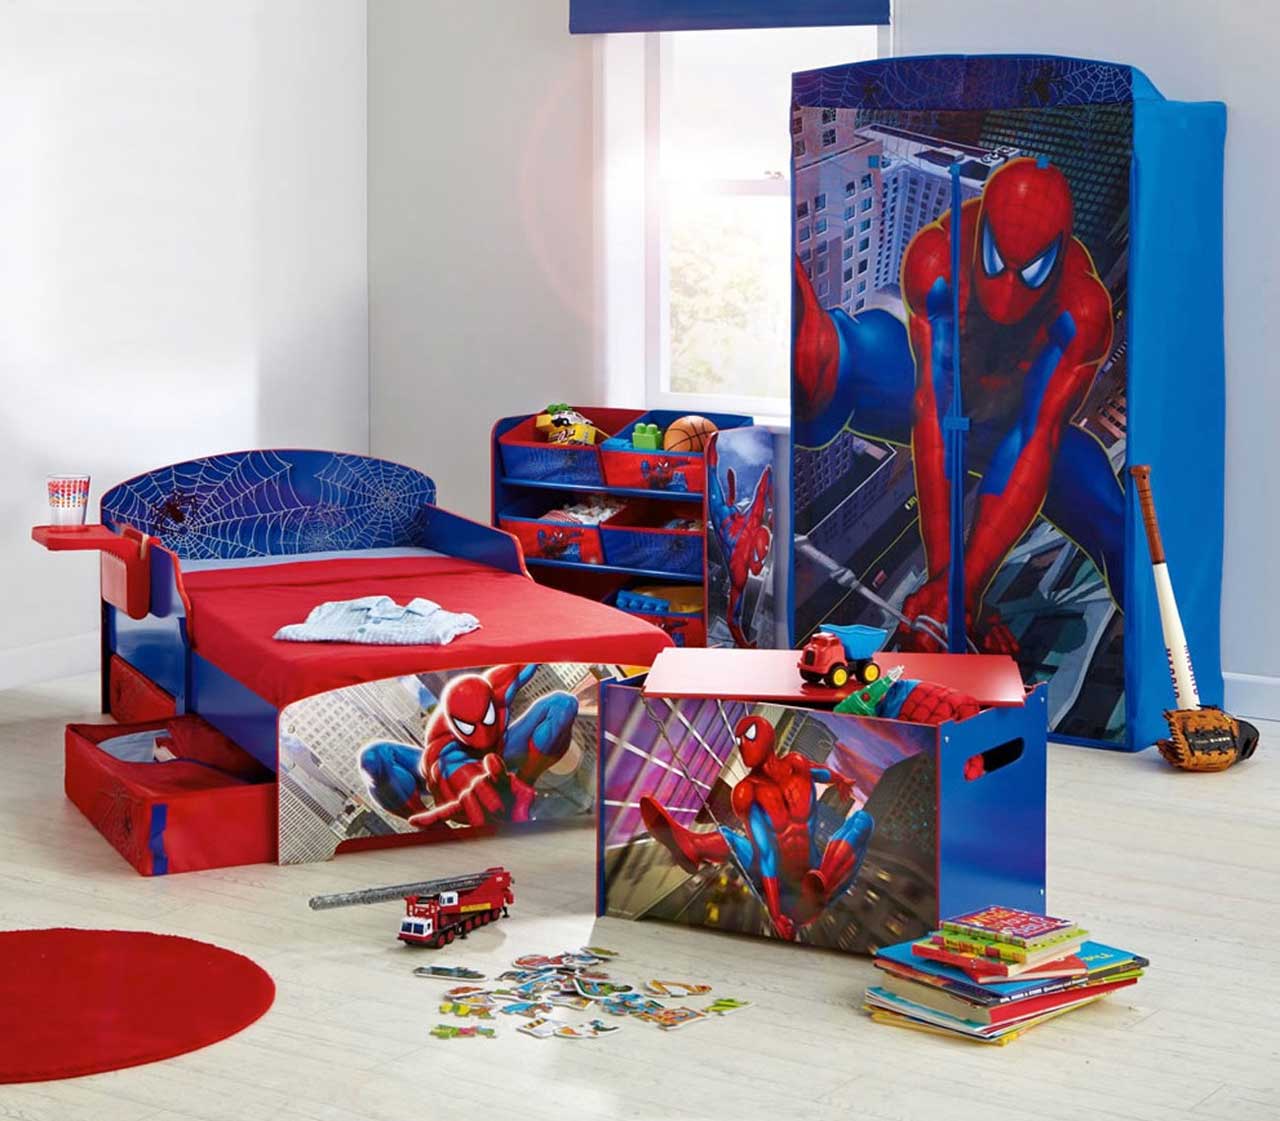 Kids Room Boys Amazing Kids Room Decor For Boys Spiderman Design Ideas Theme With Simple Bed Red And Blue Color Scheme Kids Room Decor Also Cool Cupboard Kids Room Design Decoration Kids Desire And Kids Room Decor